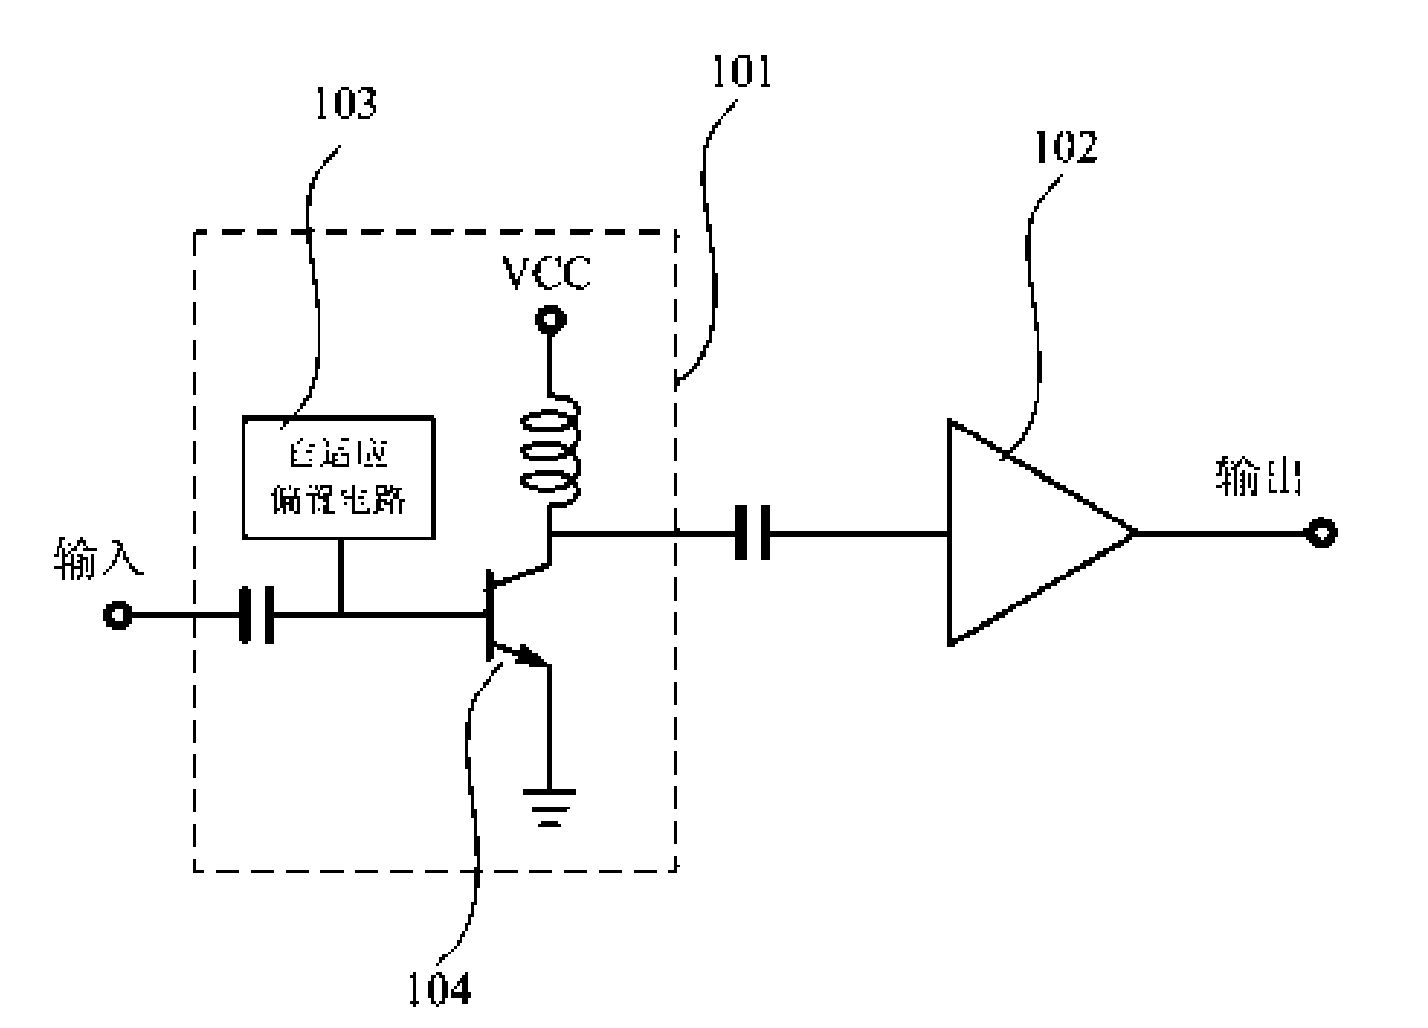 Serially concatenated multi-level radio-frequency power amplifier and front-end transmitter